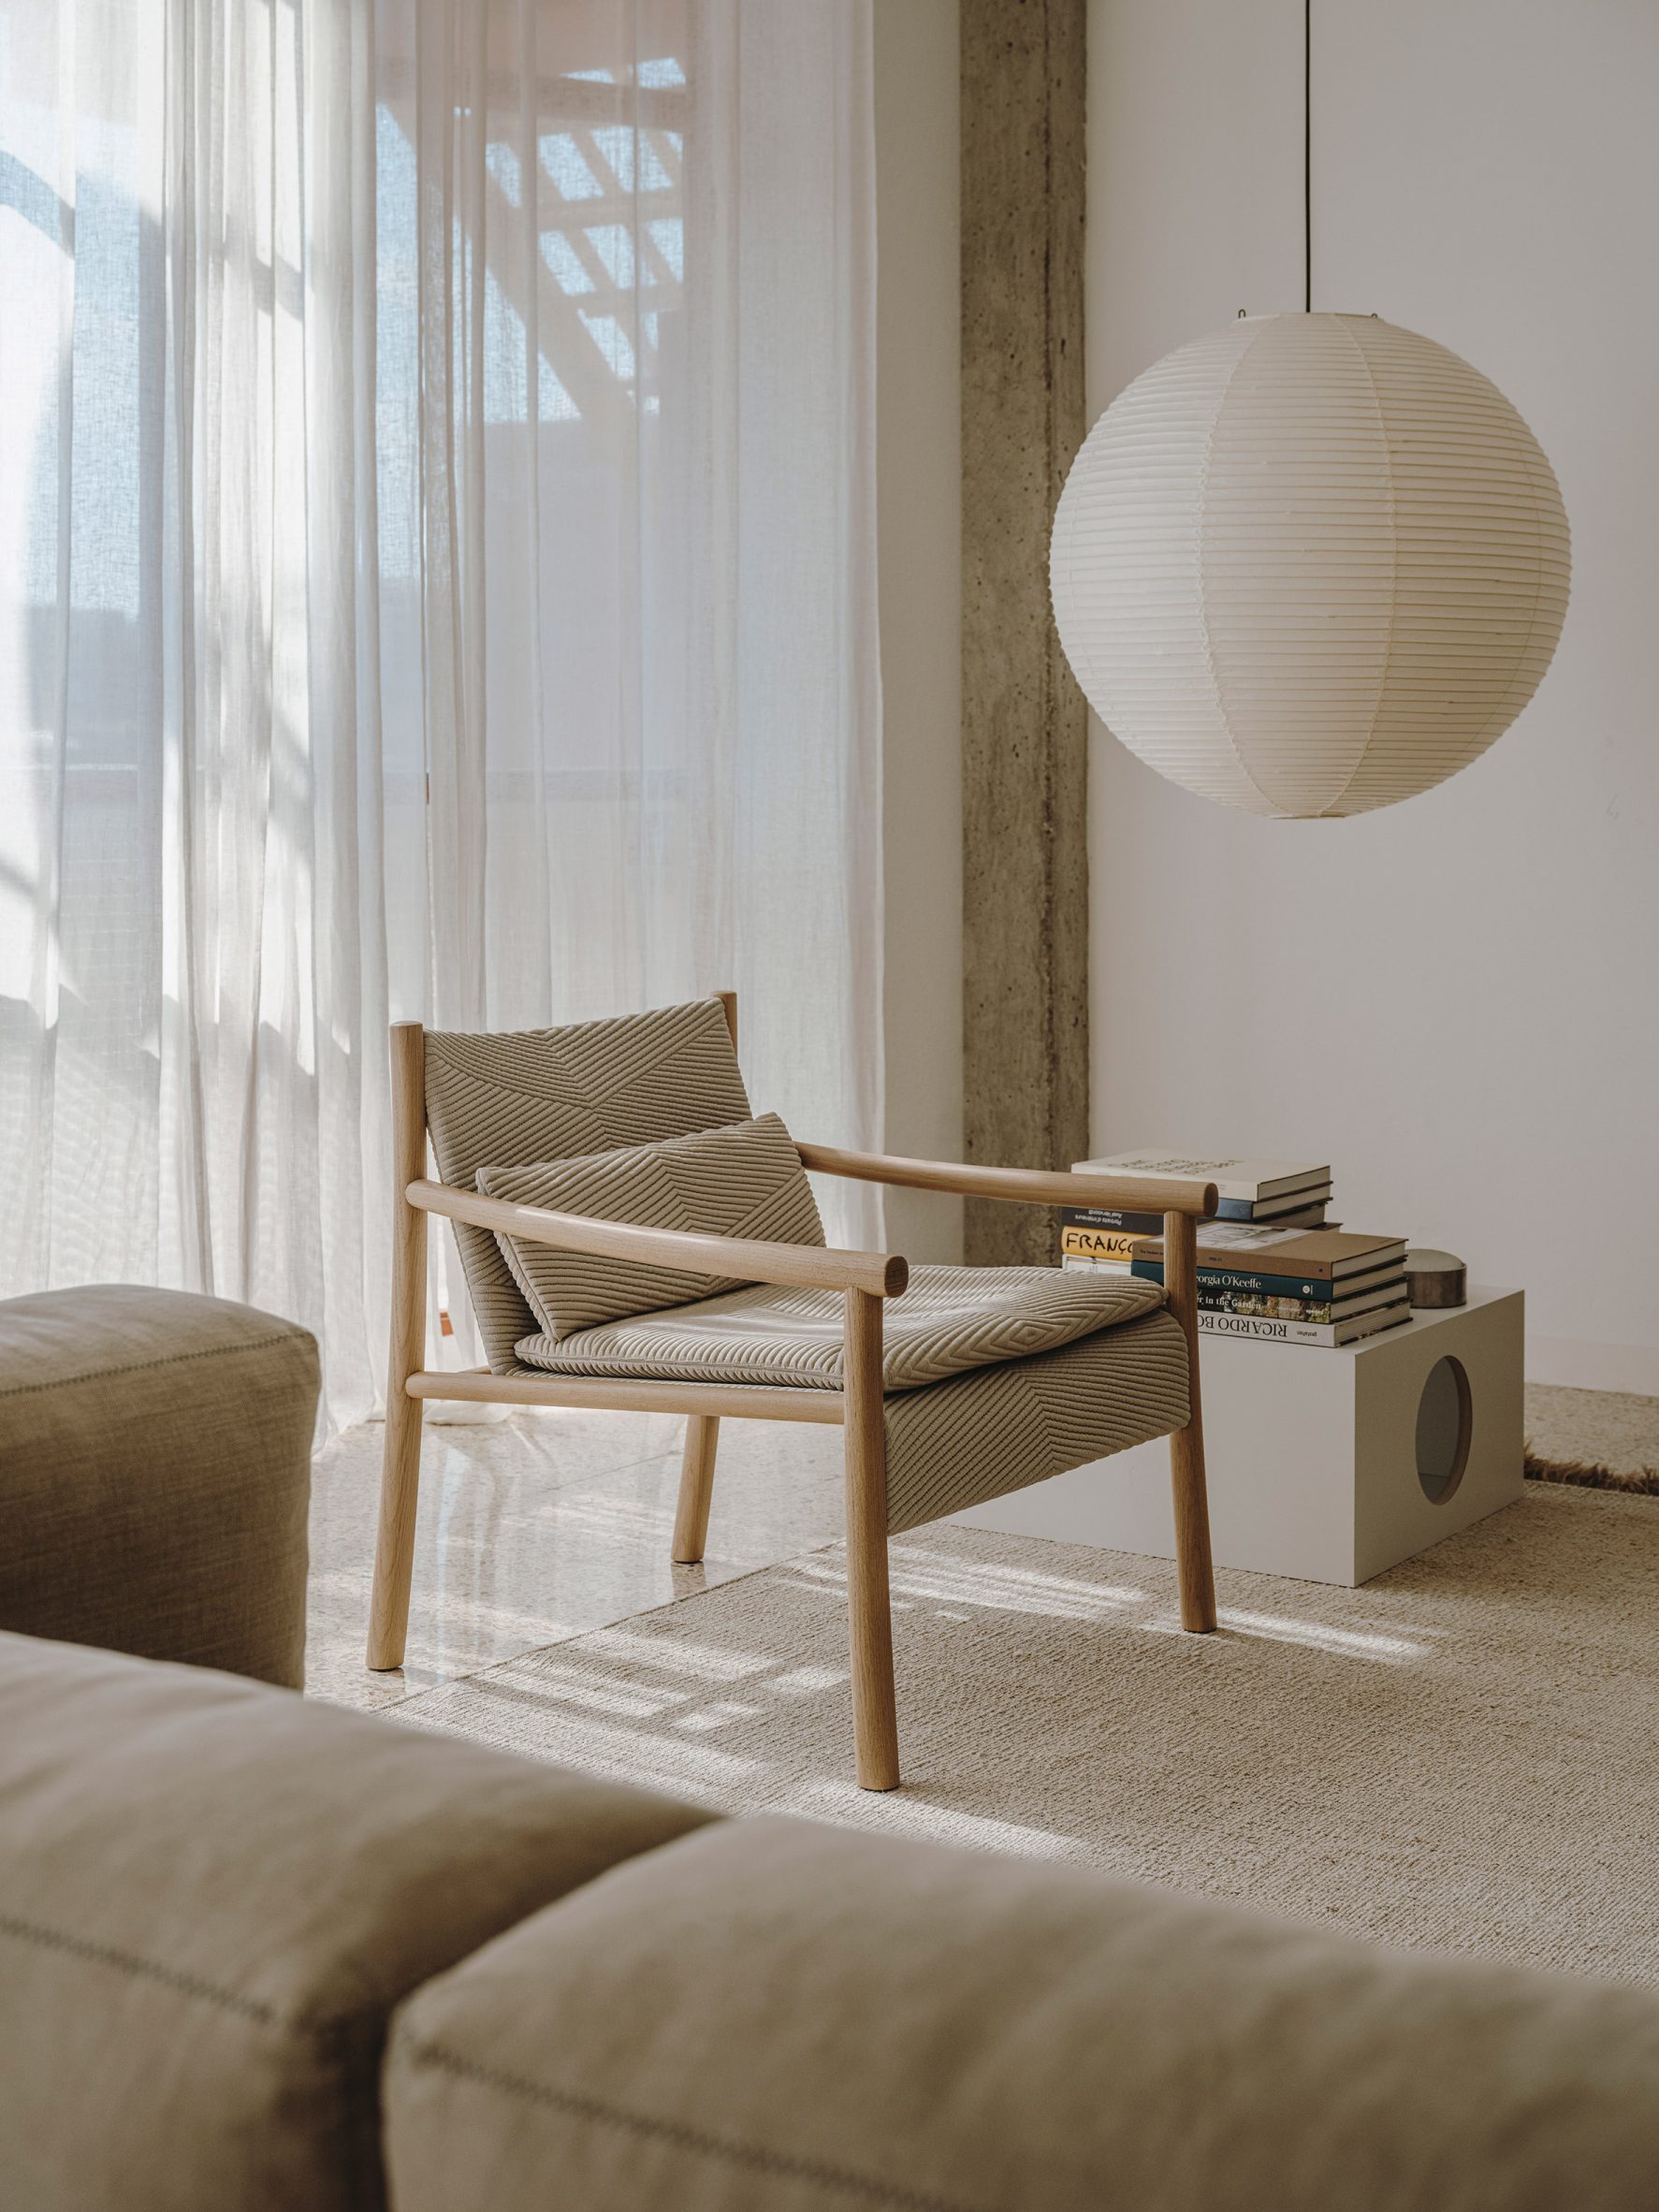 Kata chair with beige upholstery situated in a pared-back neutral interior